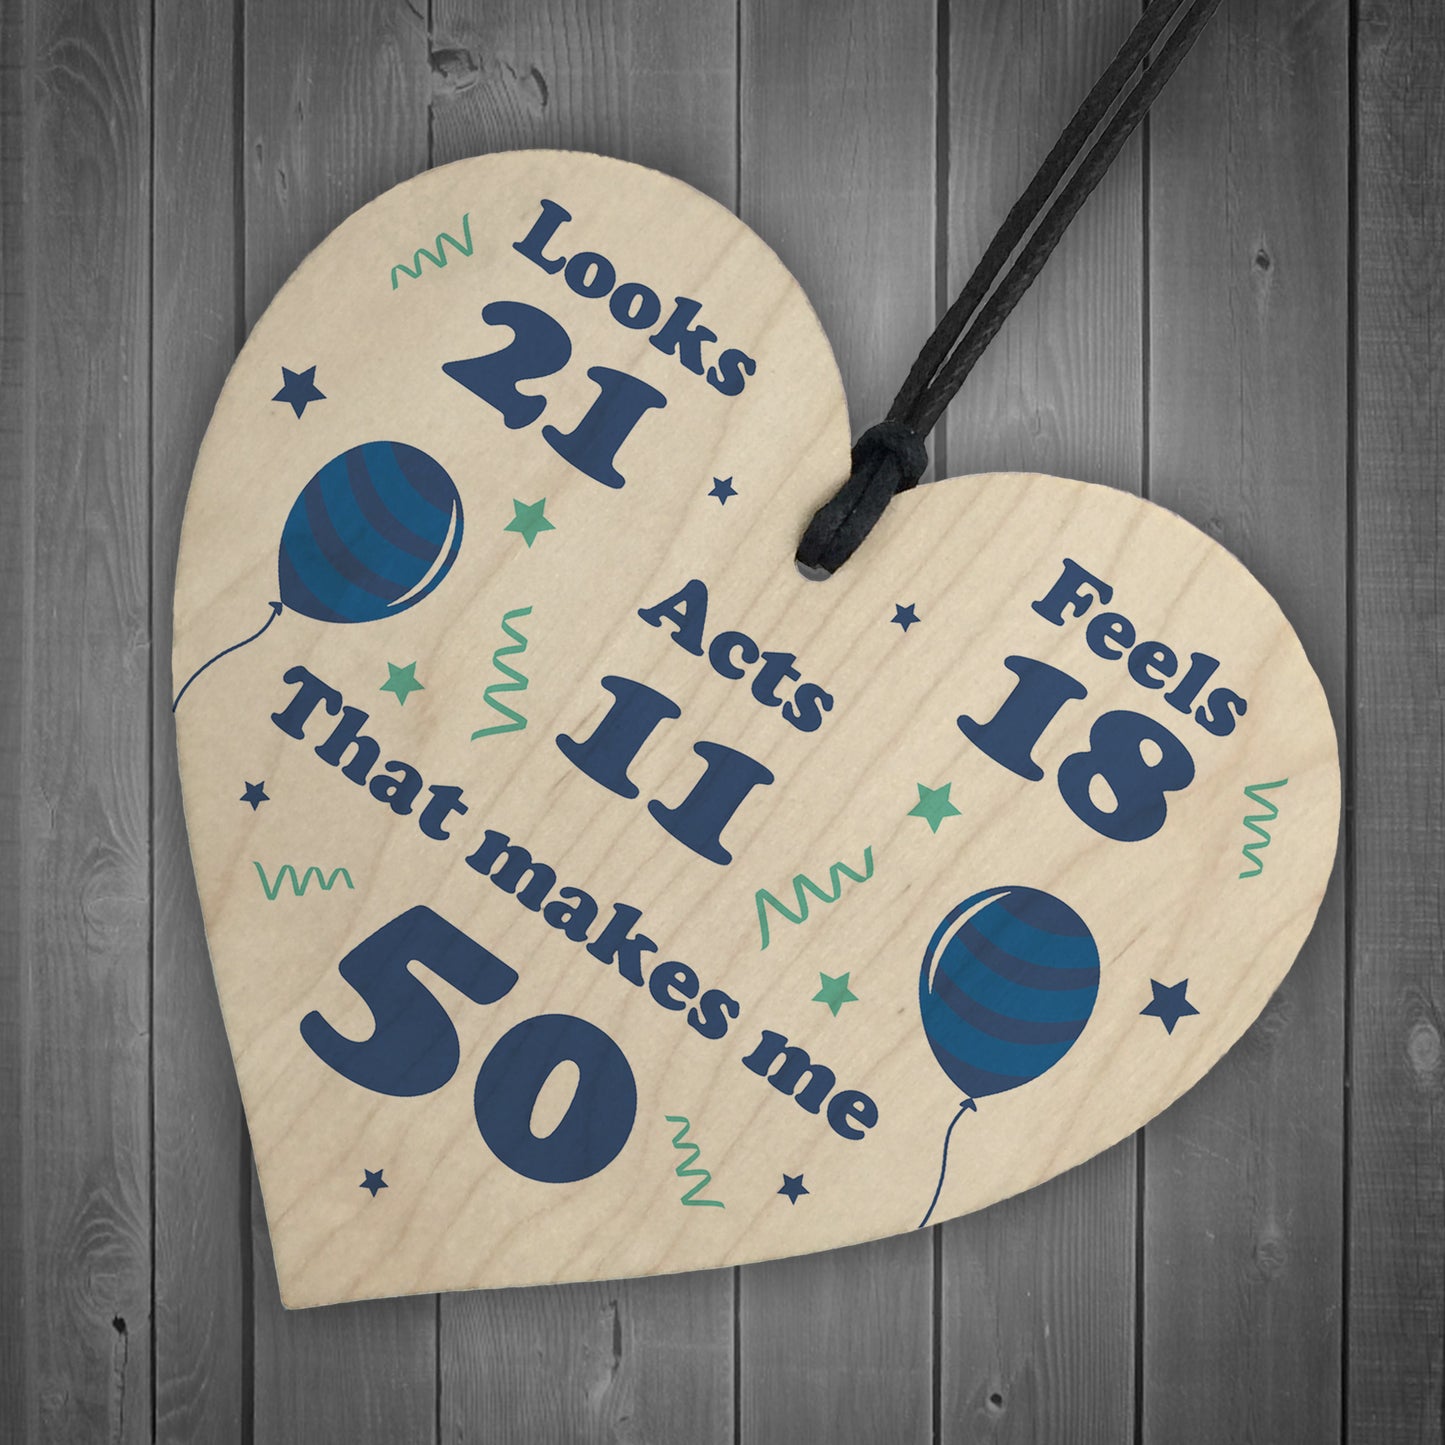 Novelty Gift For 50th Birthday Funny Wooden Heart Gift For Him